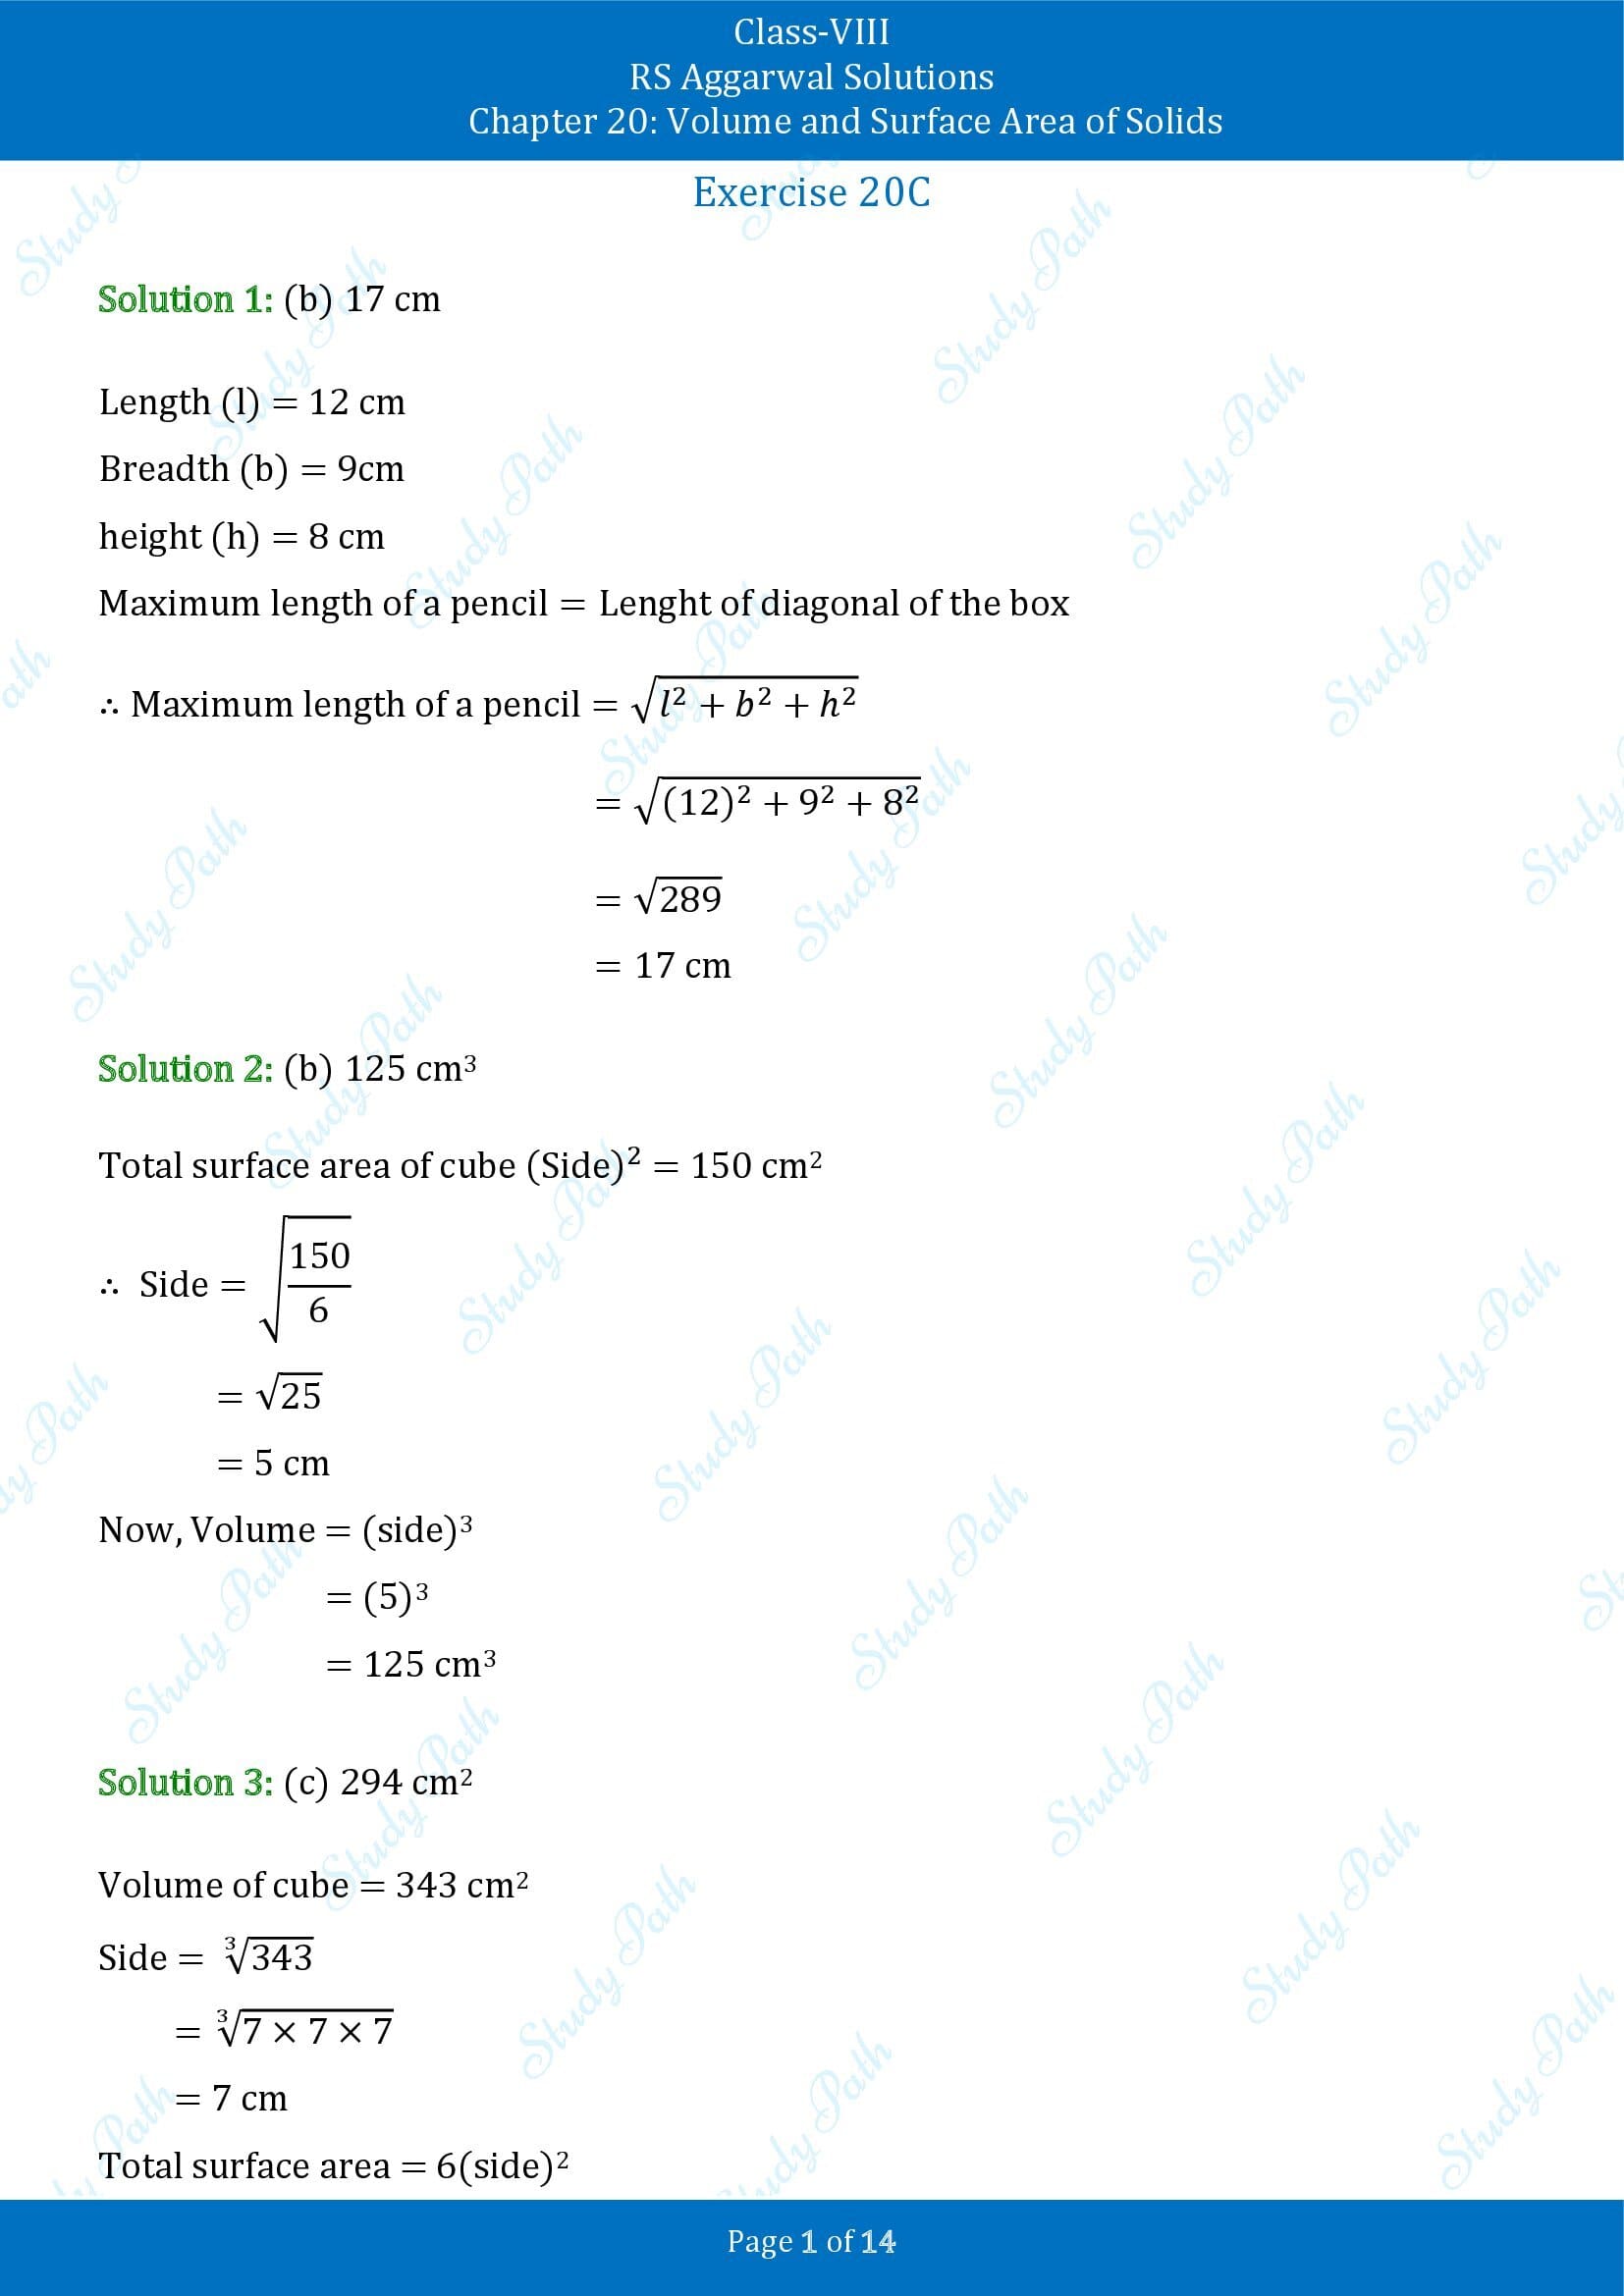 RS Aggarwal Solutions Class 8 Chapter 20 Volume and Surface Area of Solids Exercise 20C MCQs 00001